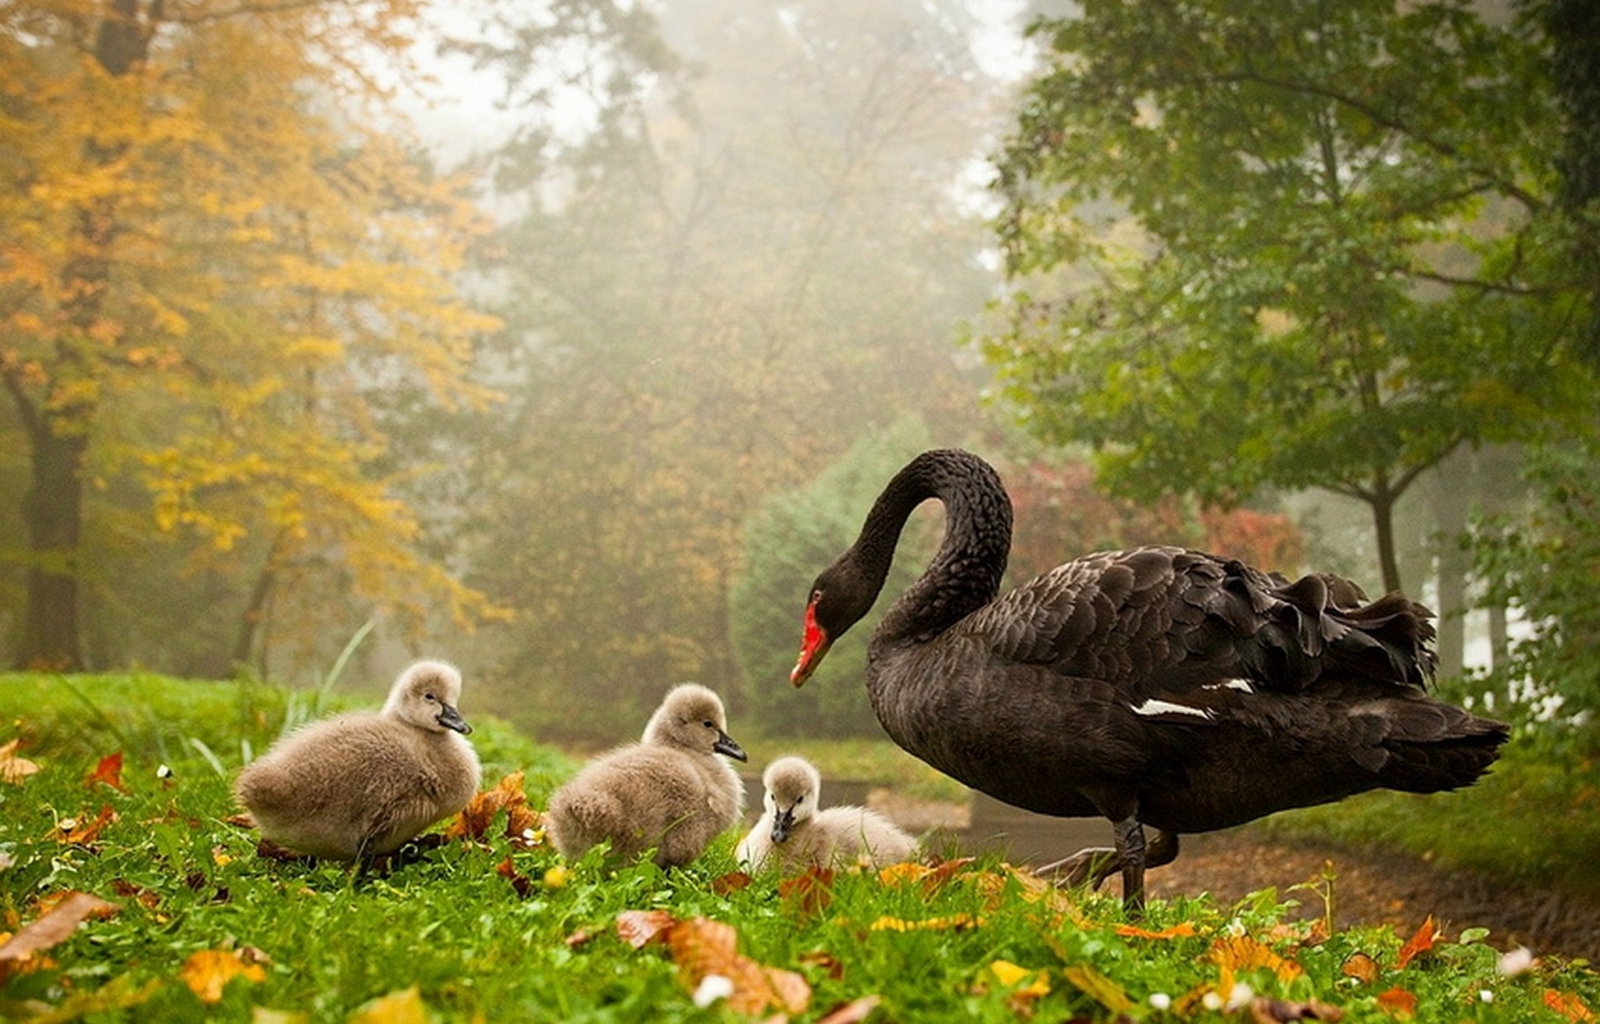 Cool Wallpapers birds, animals, swans, yellow